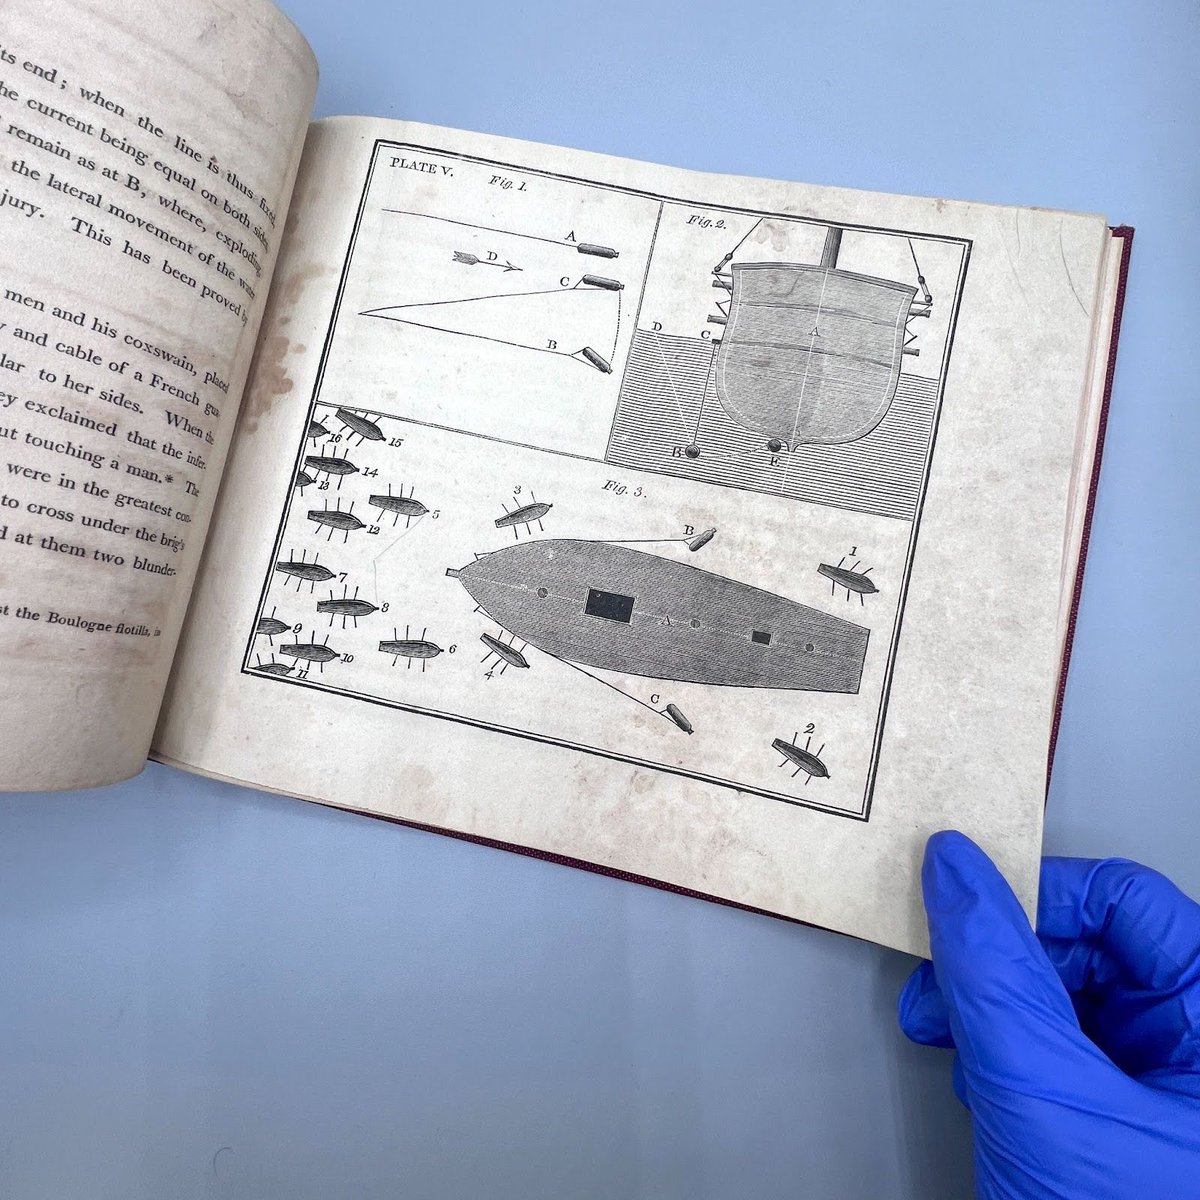 It’s #NationalSubmarineDay! Although the US Government didn't purchase its first modern submarine until 1900, engineer and inventor Robert Fulton (1765–1815) published his submarine designs and experiments nearly a century earlier in this #RareBook in our collection. 📖: 2003.14